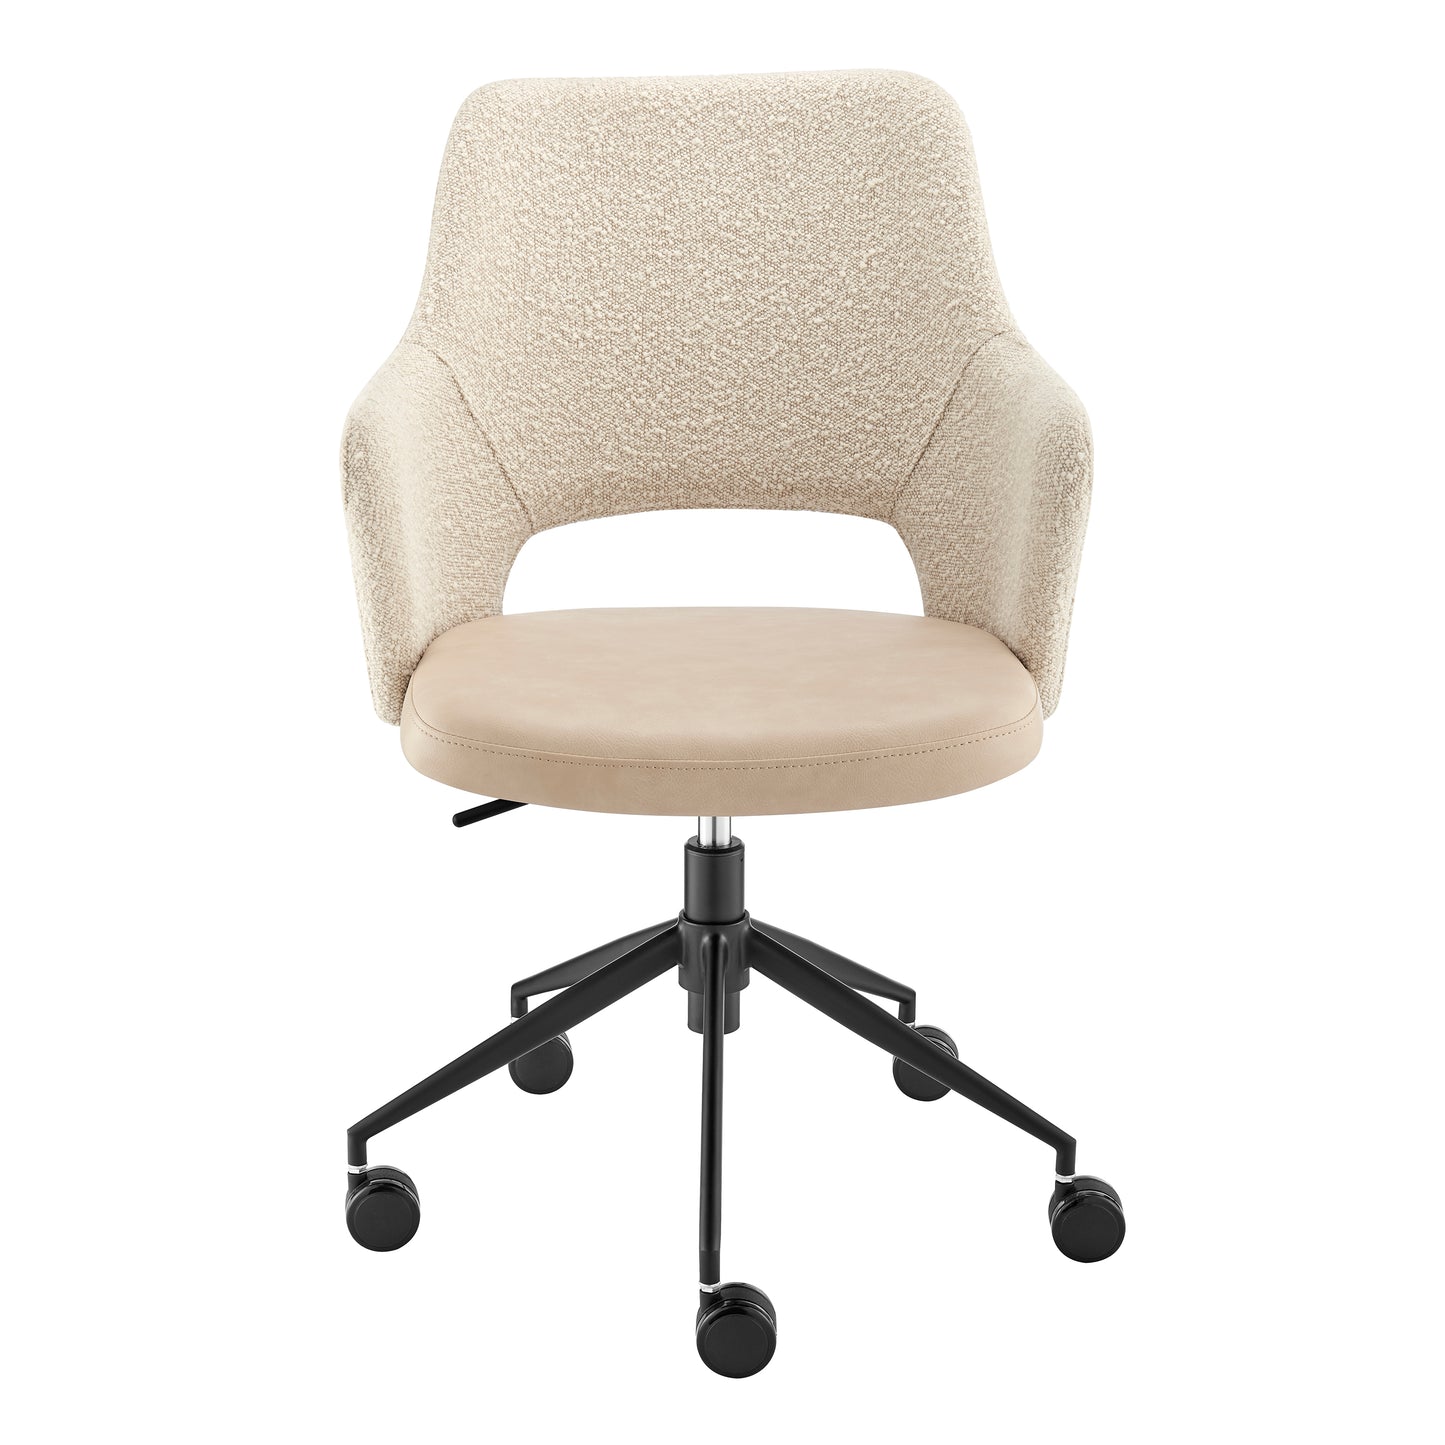 Darcie Office Chair Ivory/BlackOffice Chairs Eurostyle  Ivory/Black   Four Hands, Mid Century Modern Furniture, Old Bones Furniture Company, Old Bones Co, Modern Mid Century, Designer Furniture, https://www.oldbonesco.com/